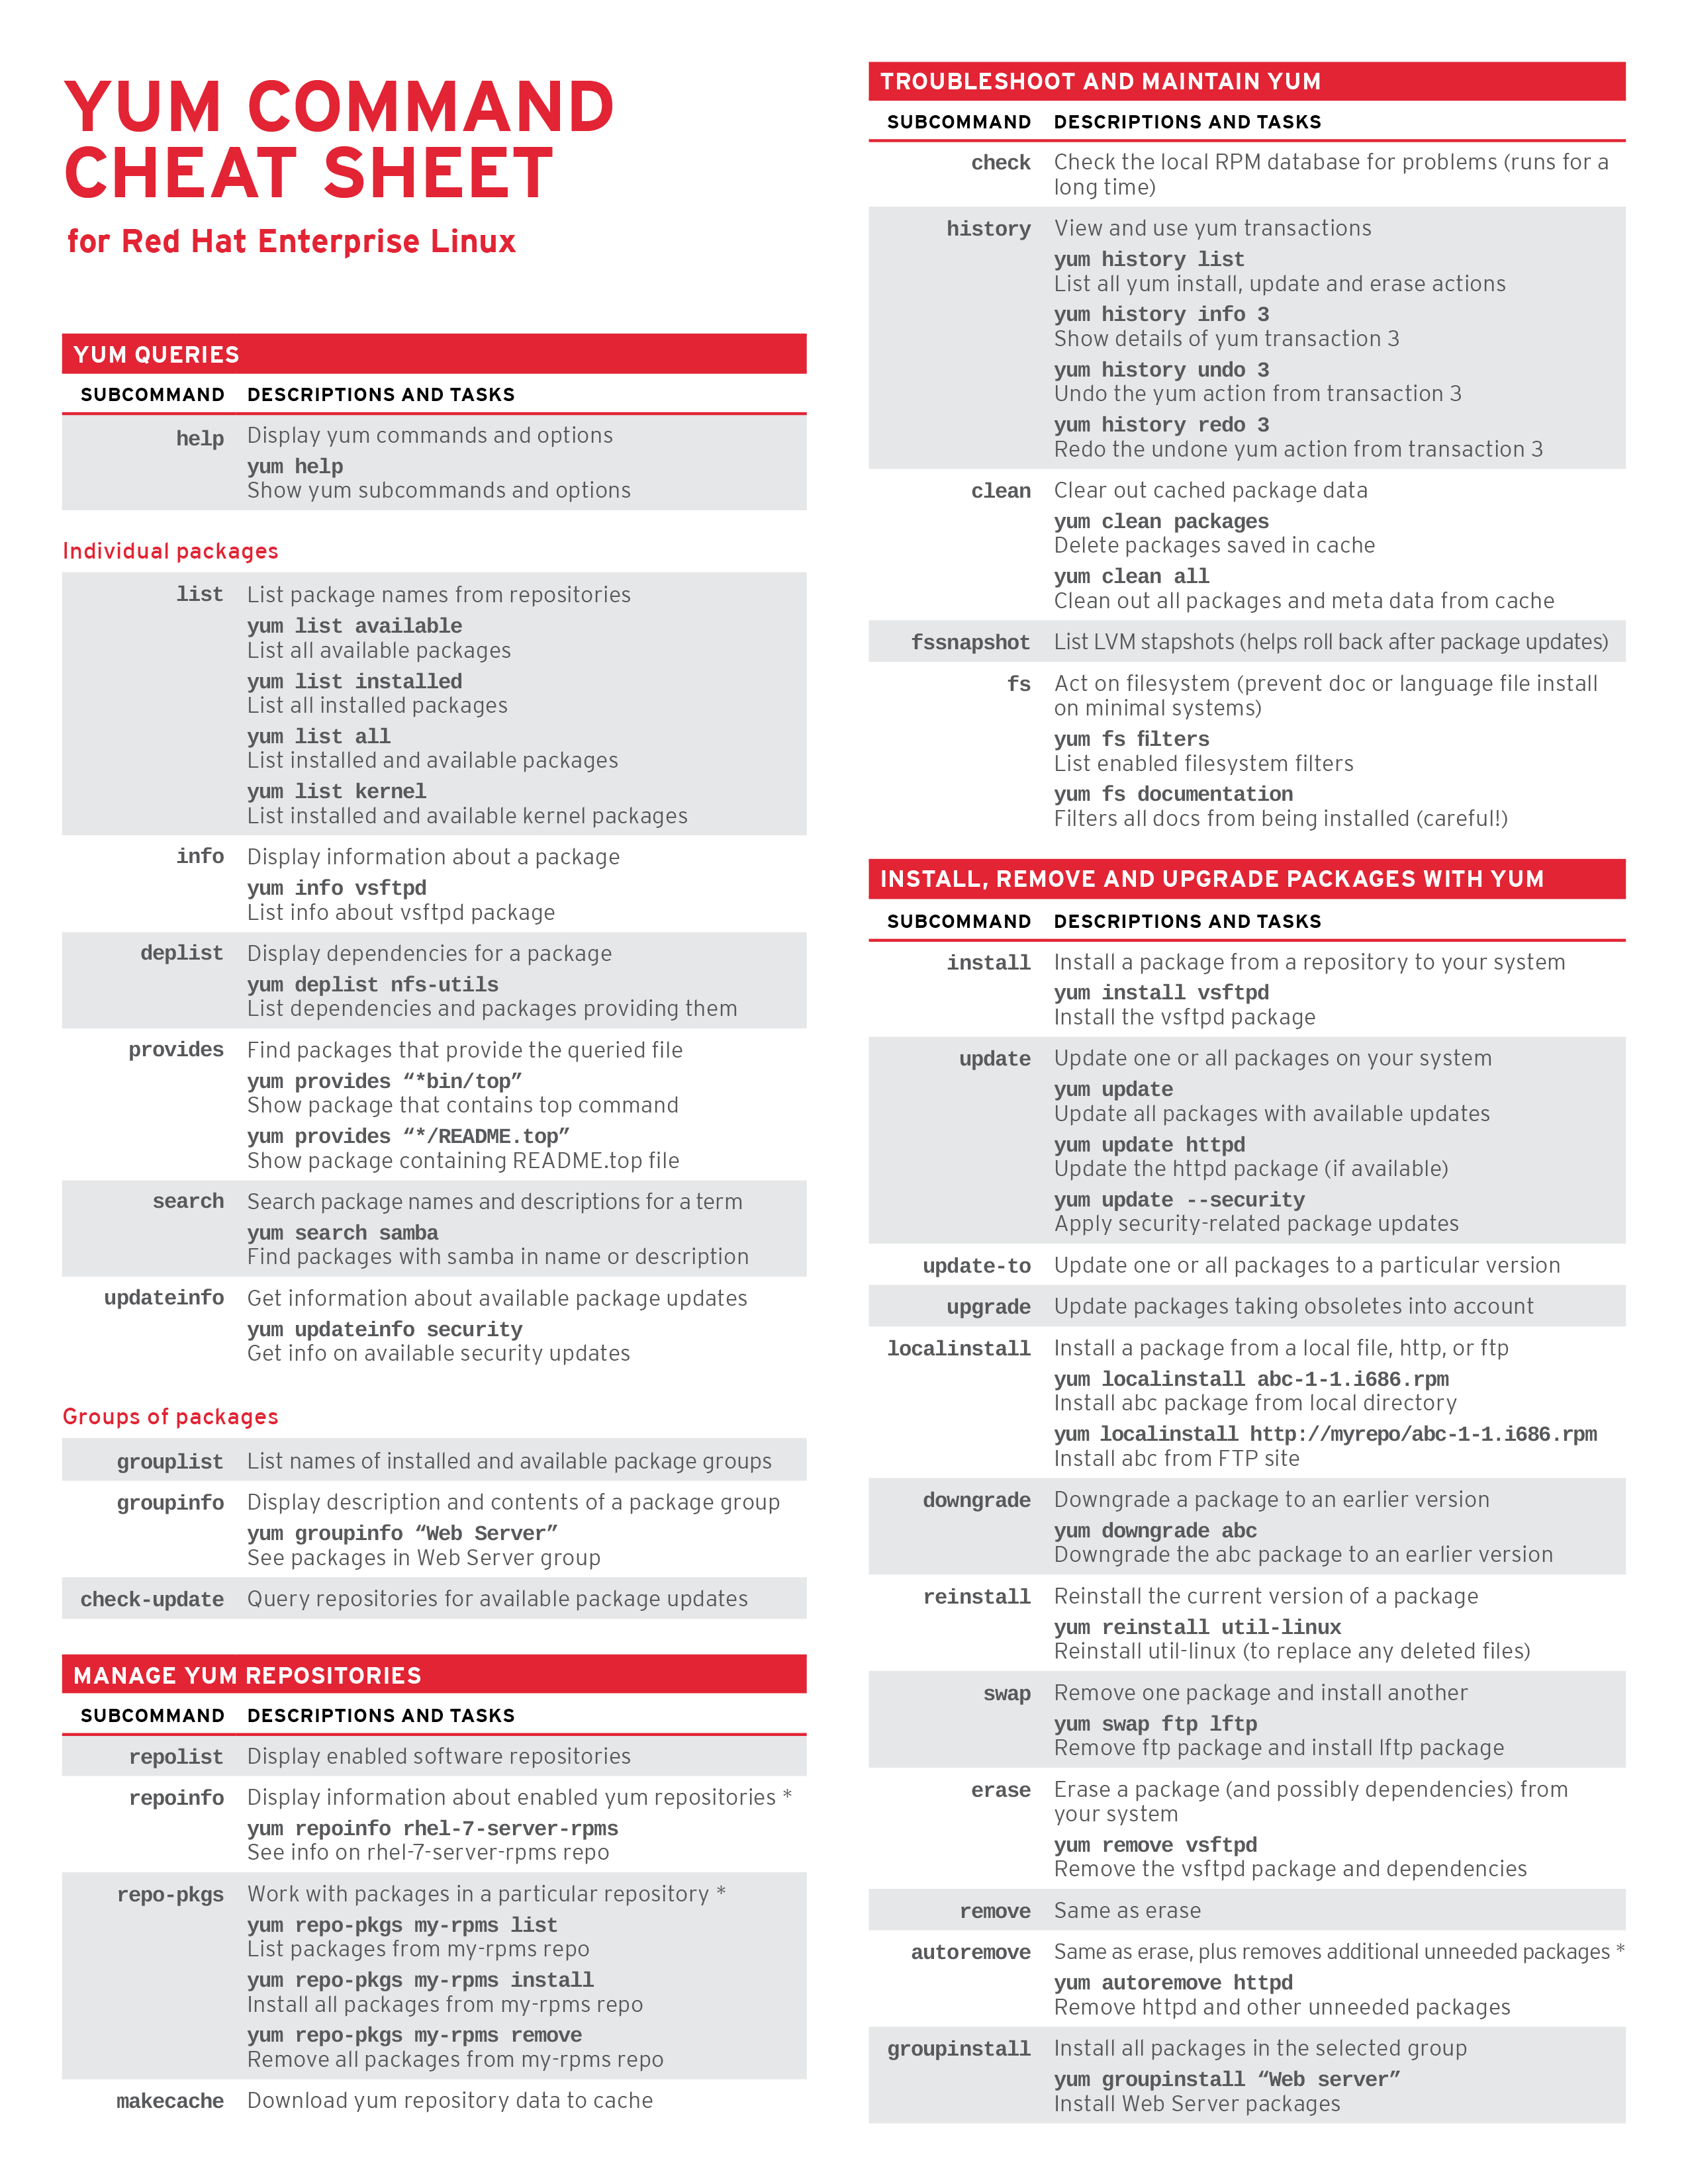 linux command cheat sheet redhat one page